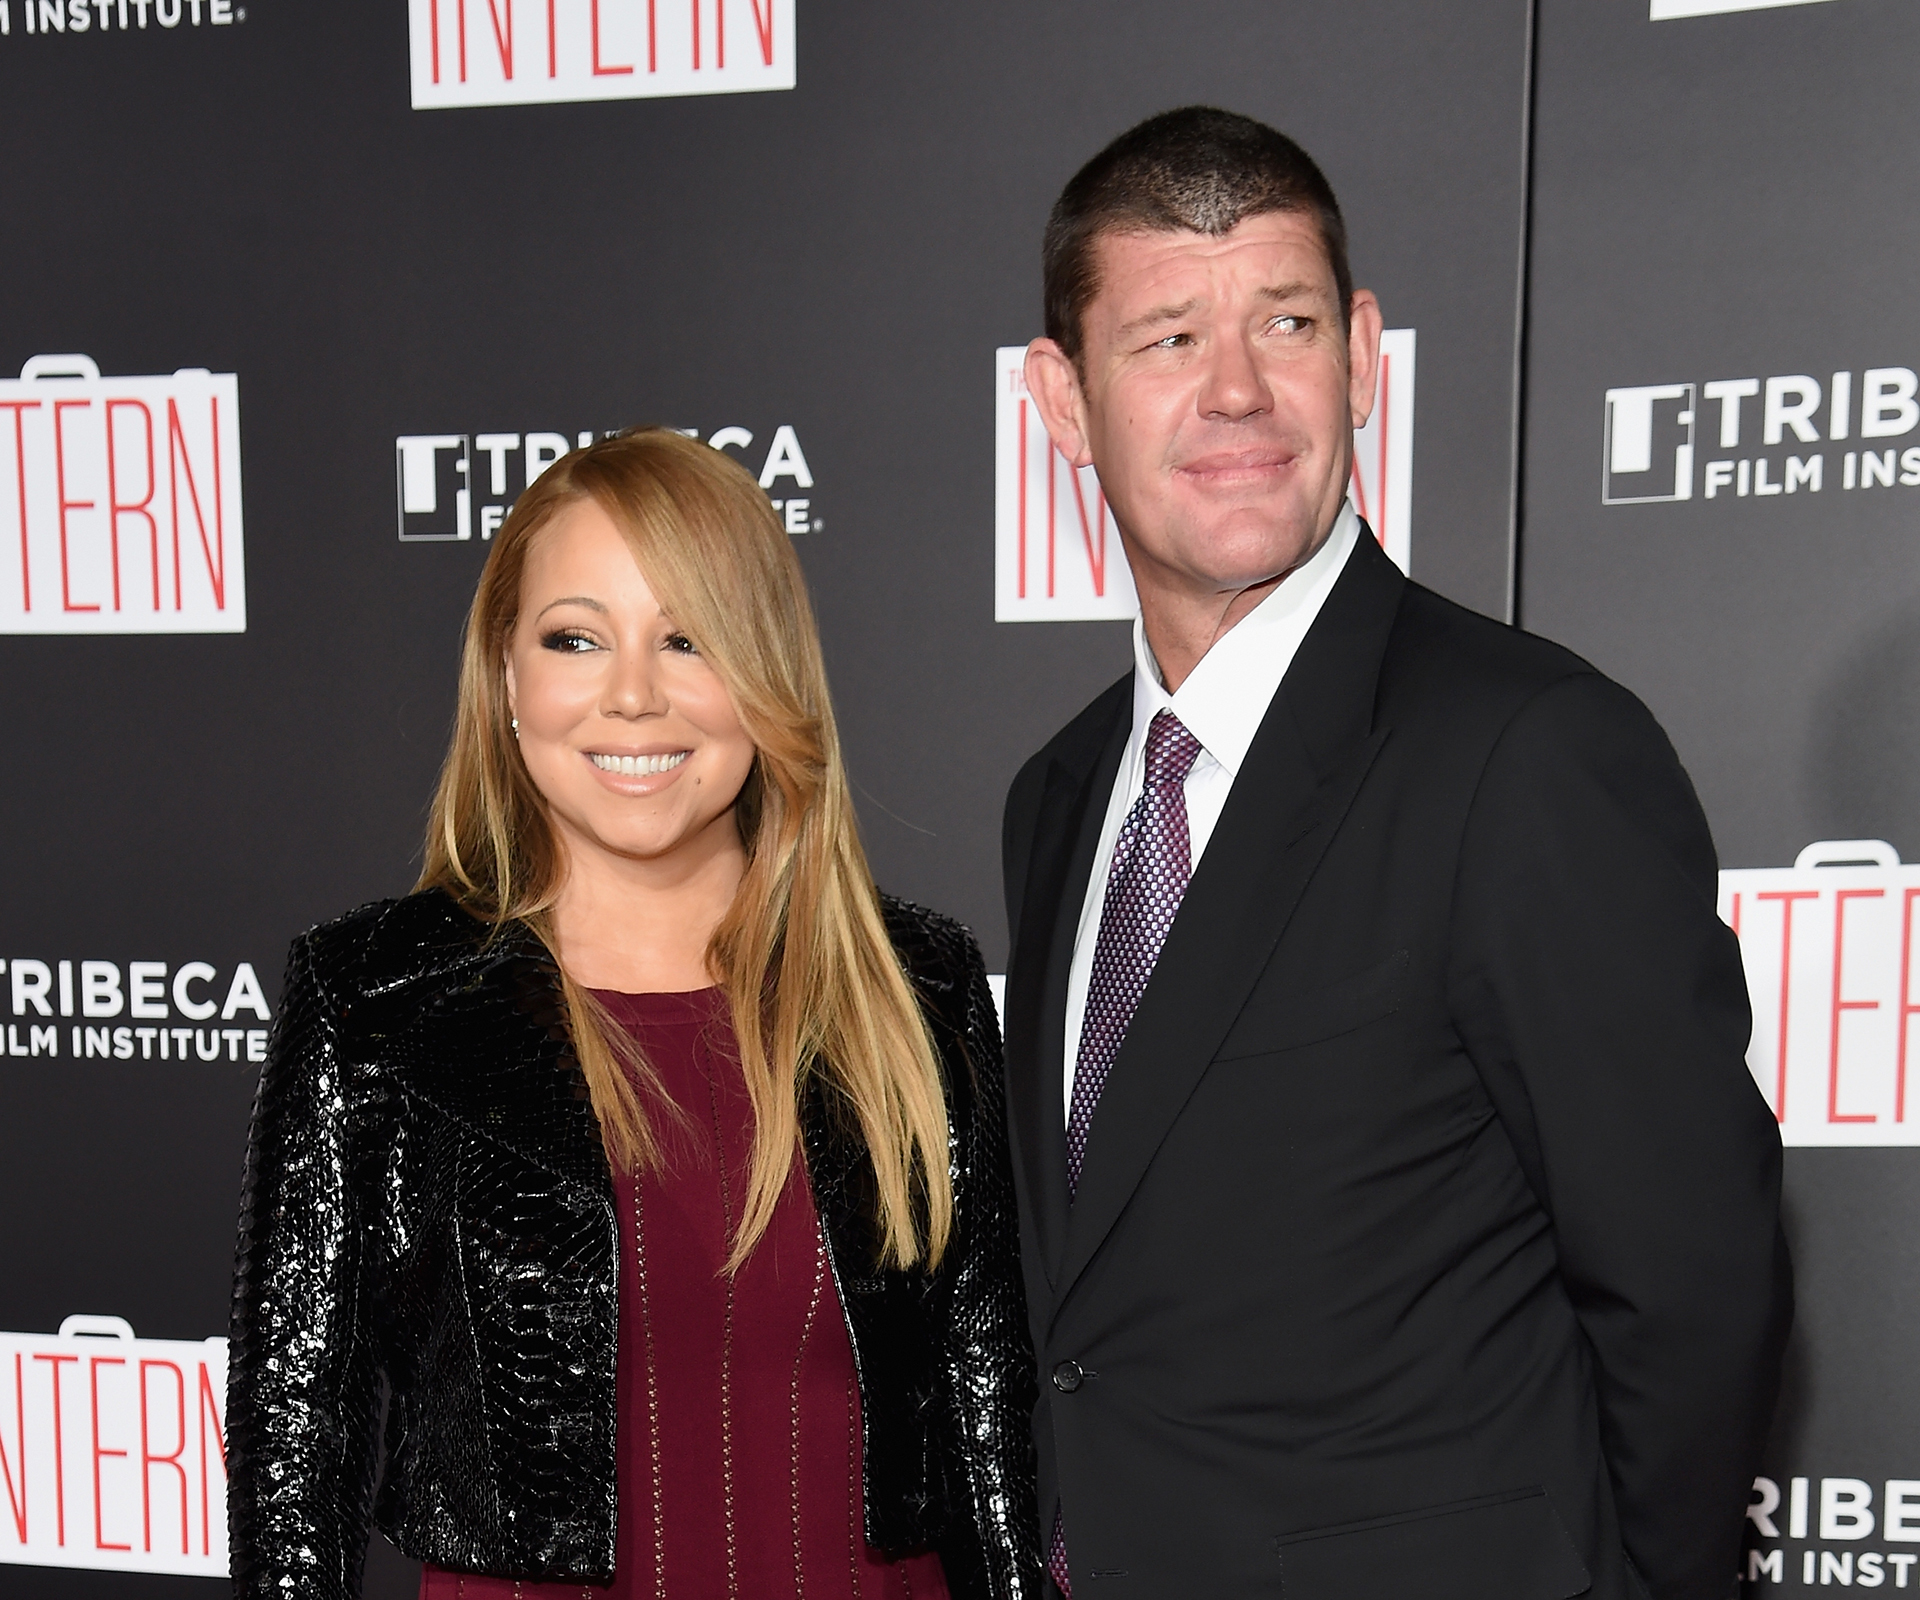 James Packer and Mariah Carey’s $250,000 a month Cali mansion